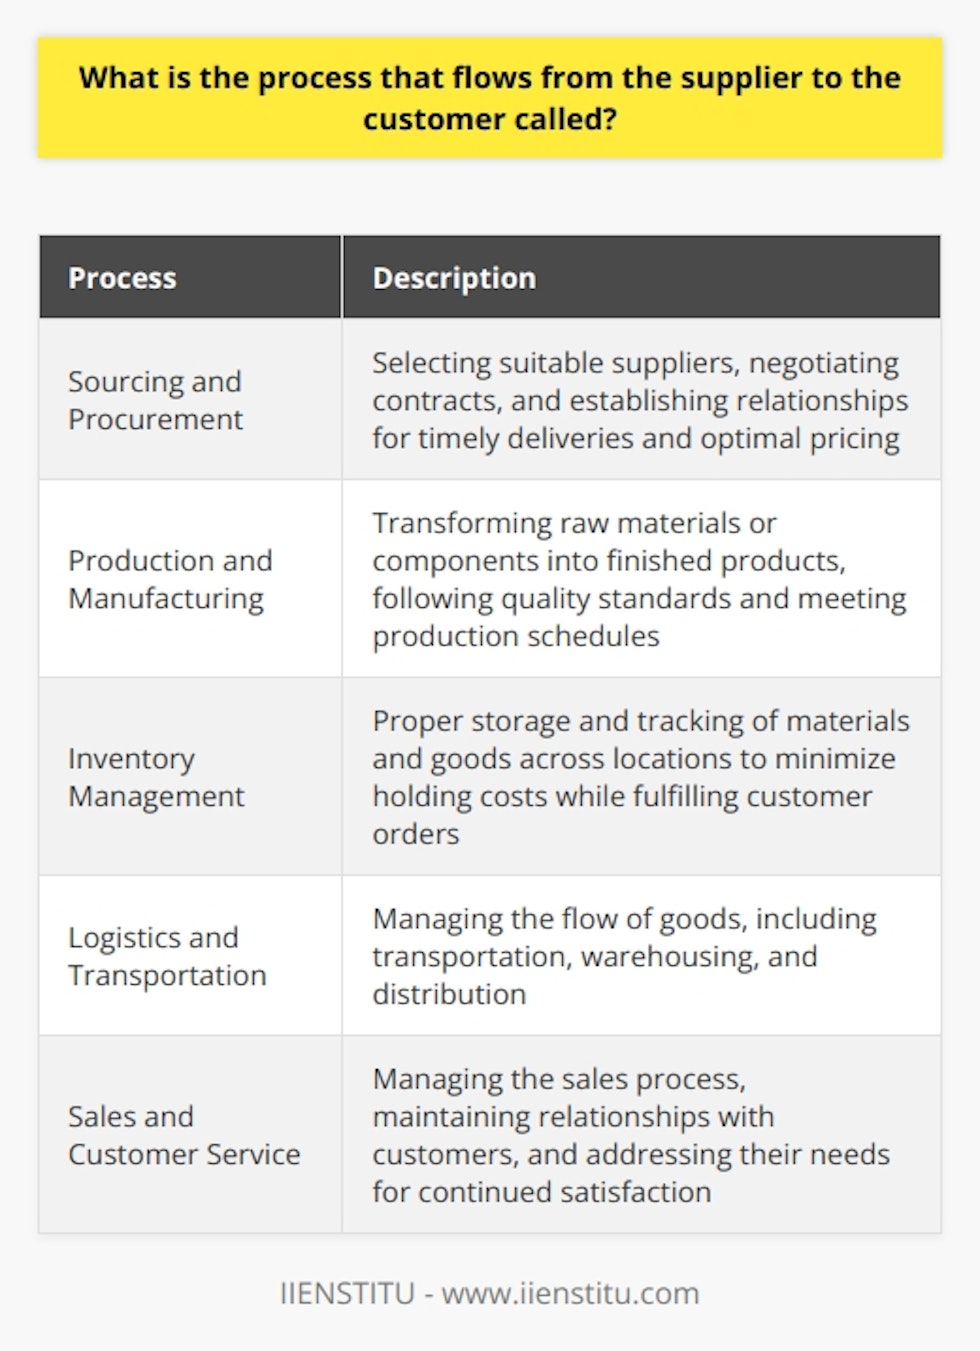 Supply chain management (SCM) is the process that flows from the supplier to the customer, encompassing activities and strategies necessary to effectively manage the flow of goods, services, and information. It involves key components such as sourcing and procurement, production and manufacturing, inventory management, logistics and transportation, and sales and customer service.Sourcing and procurement involve selecting suitable suppliers, negotiating contracts, and establishing relationships for timely deliveries and optimal pricing. Production and manufacturing focus on transforming raw materials or components into finished products, following quality standards and meeting production schedules. Inventory management ensures proper storage and tracking of materials and goods across locations to minimize holding costs while fulfilling customer orders.Logistics and transportation manage the flow of goods, including transportation, warehousing, and distribution. Sales and customer service involve managing the sales process, maintaining relationships with customers, and addressing their needs for continued satisfaction.Effective SCM offers various benefits, including improved operational efficiency, reduced lead times, increased customer satisfaction, and enhanced competitiveness. Streamlining the flow of goods, services, and information enables waste reduction, better resource management, and quick response to market fluctuations.However, achieving an efficiently managed supply chain can be challenging due to factors such as global sourcing, evolving technology, and unforeseen disruptions. Companies must continuously adapt and innovate their SCM practices to overcome these challenges and maintain a competitive edge.In conclusion, SCM is crucial for a company's success. By effectively managing the flow of goods, services, and information, businesses can optimize their operations, satisfy customer needs, and maintain a competitive advantage.